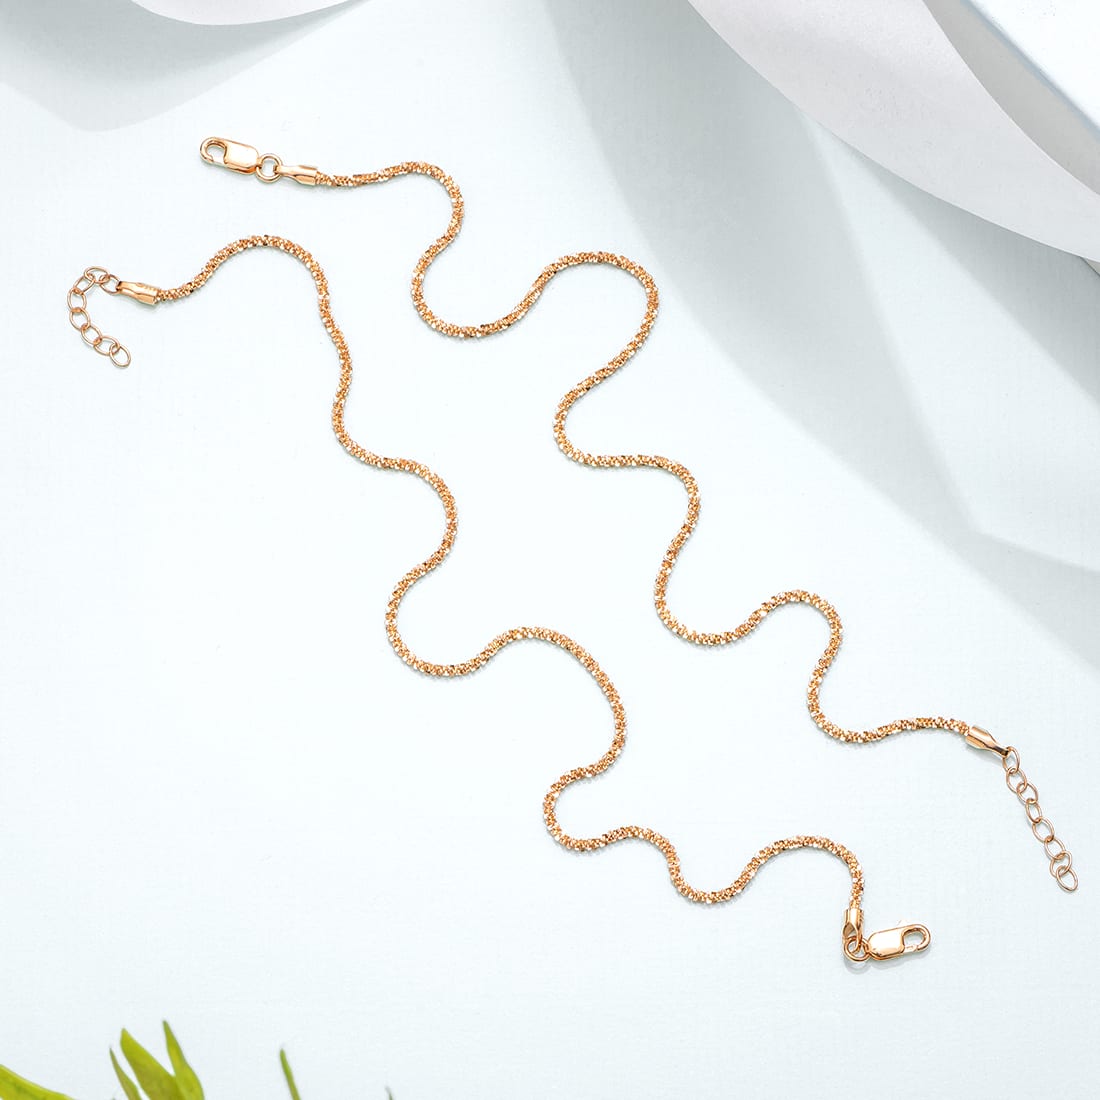 Sparkling Rose Gold Plated 925 Sterling Silver Chain Anklets